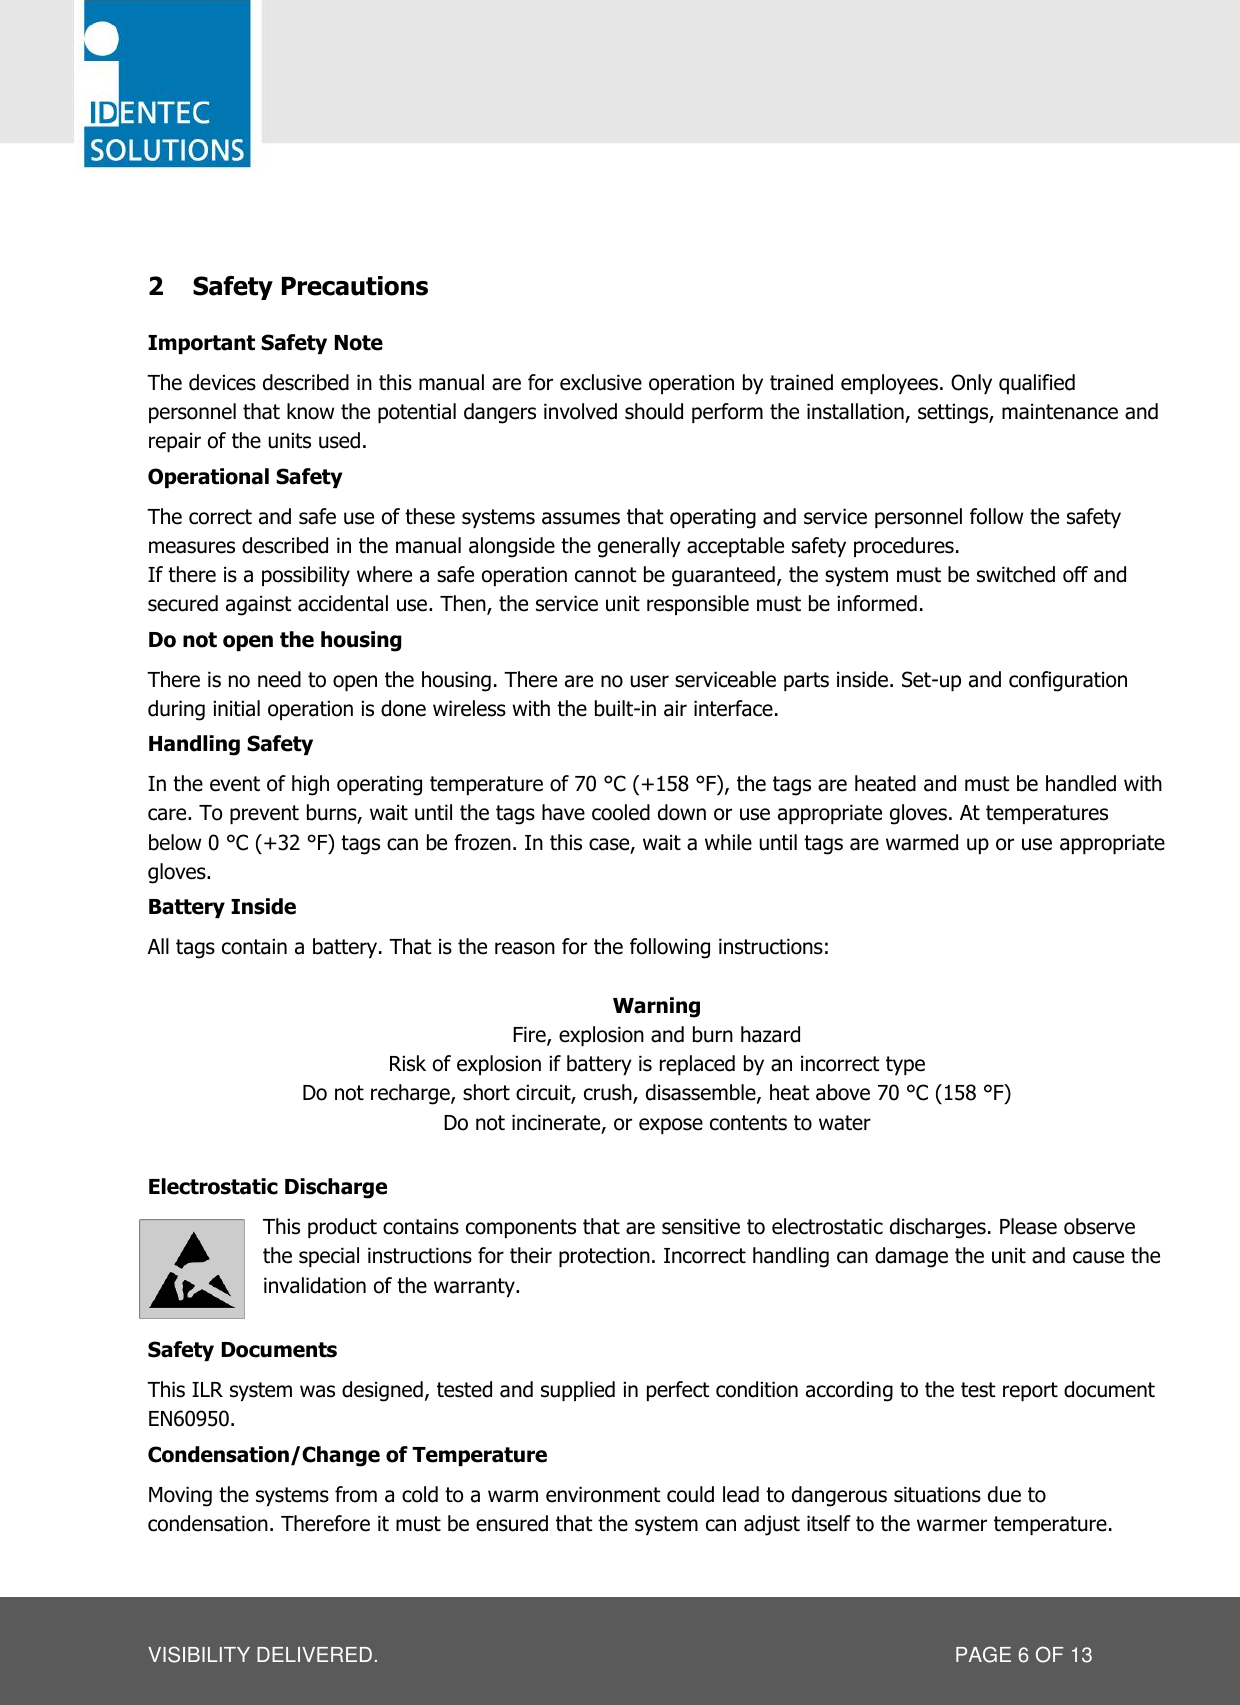   VISIBILITY DELIVERED.  PAGE 6 OF 13  2 Safety Precautions Important Safety Note The devices described in this manual are for exclusive operation by trained employees. Only qualified personnel that know the potential dangers involved should perform the installation, settings, maintenance and repair of the units used. Operational Safety The correct and safe use of these systems assumes that operating and service personnel follow the safety measures described in the manual alongside the generally acceptable safety procedures. If there is a possibility where a safe operation cannot be guaranteed, the system must be switched off and secured against accidental use. Then, the service unit responsible must be informed. Do not open the housing There is no need to open the housing. There are no user serviceable parts inside. Set-up and configuration during initial operation is done wireless with the built-in air interface. Handling Safety In the event of high operating temperature of 70 °C (+158 °F), the tags are heated and must be handled with care. To prevent burns, wait until the tags have cooled down or use appropriate gloves. At temperatures below 0 °C (+32 °F) tags can be frozen. In this case, wait a while until tags are warmed up or use appropriate gloves.  Battery Inside All tags contain a battery. That is the reason for the following instructions:  Warning Fire, explosion and burn hazard Risk of explosion if battery is replaced by an incorrect type Do not recharge, short circuit, crush, disassemble, heat above 70 °C (158 °F) Do not incinerate, or expose contents to water  Electrostatic Discharge This product contains components that are sensitive to electrostatic discharges. Please observe the special instructions for their protection. Incorrect handling can damage the unit and cause the invalidation of the warranty.  Safety Documents This ILR system was designed, tested and supplied in perfect condition according to the test report document EN60950. Condensation/Change of Temperature Moving the systems from a cold to a warm environment could lead to dangerous situations due to condensation. Therefore it must be ensured that the system can adjust itself to the warmer temperature. 